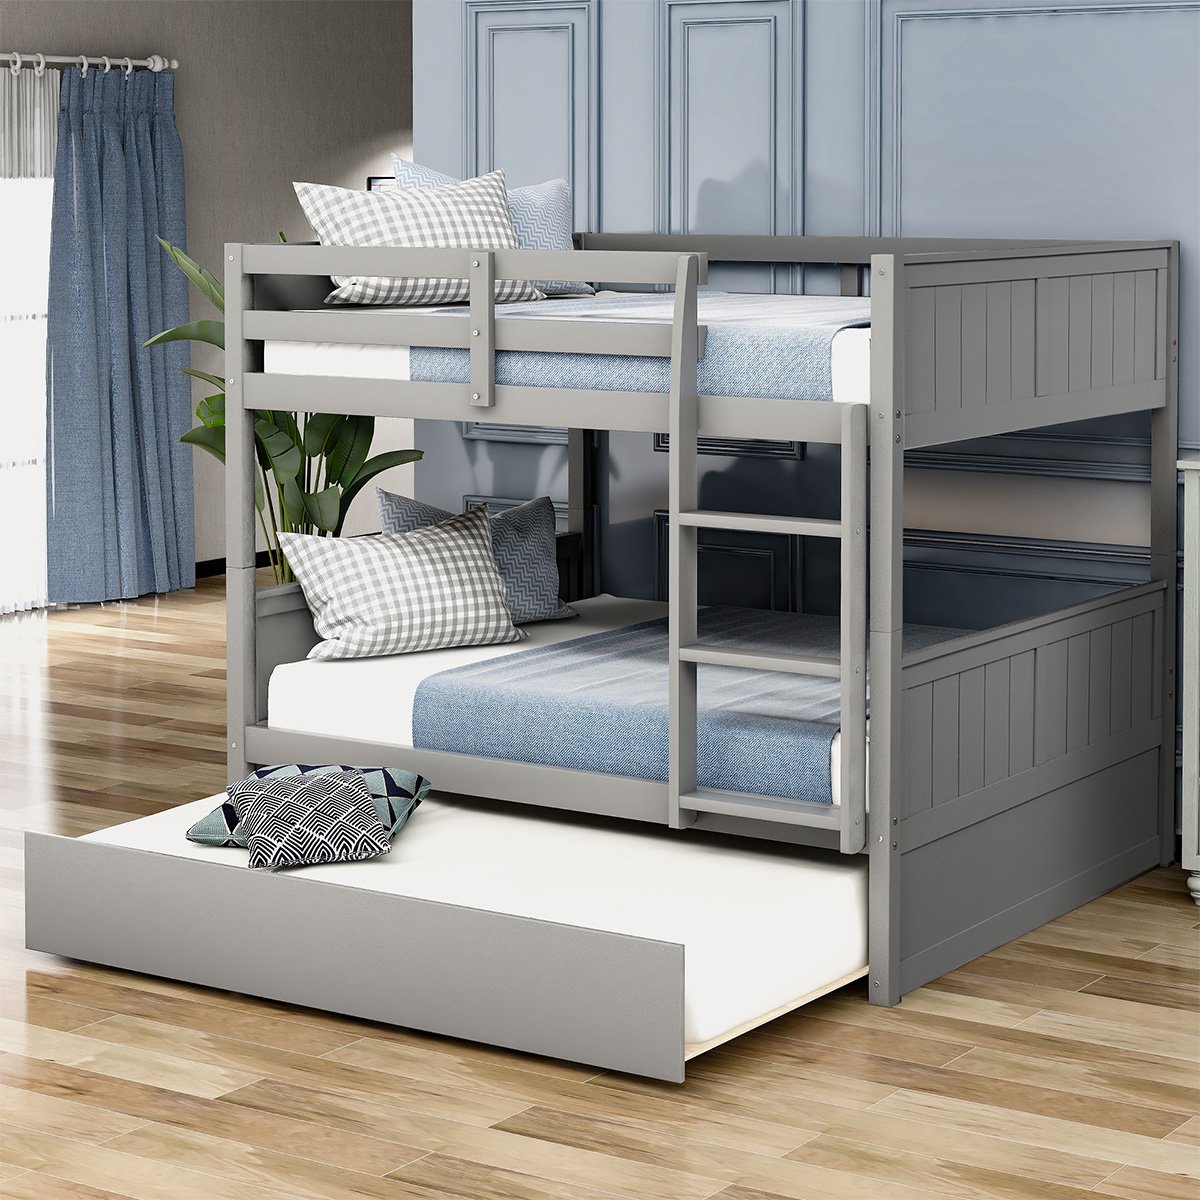 SENTERN Full over Full Bunk Bed with Twin